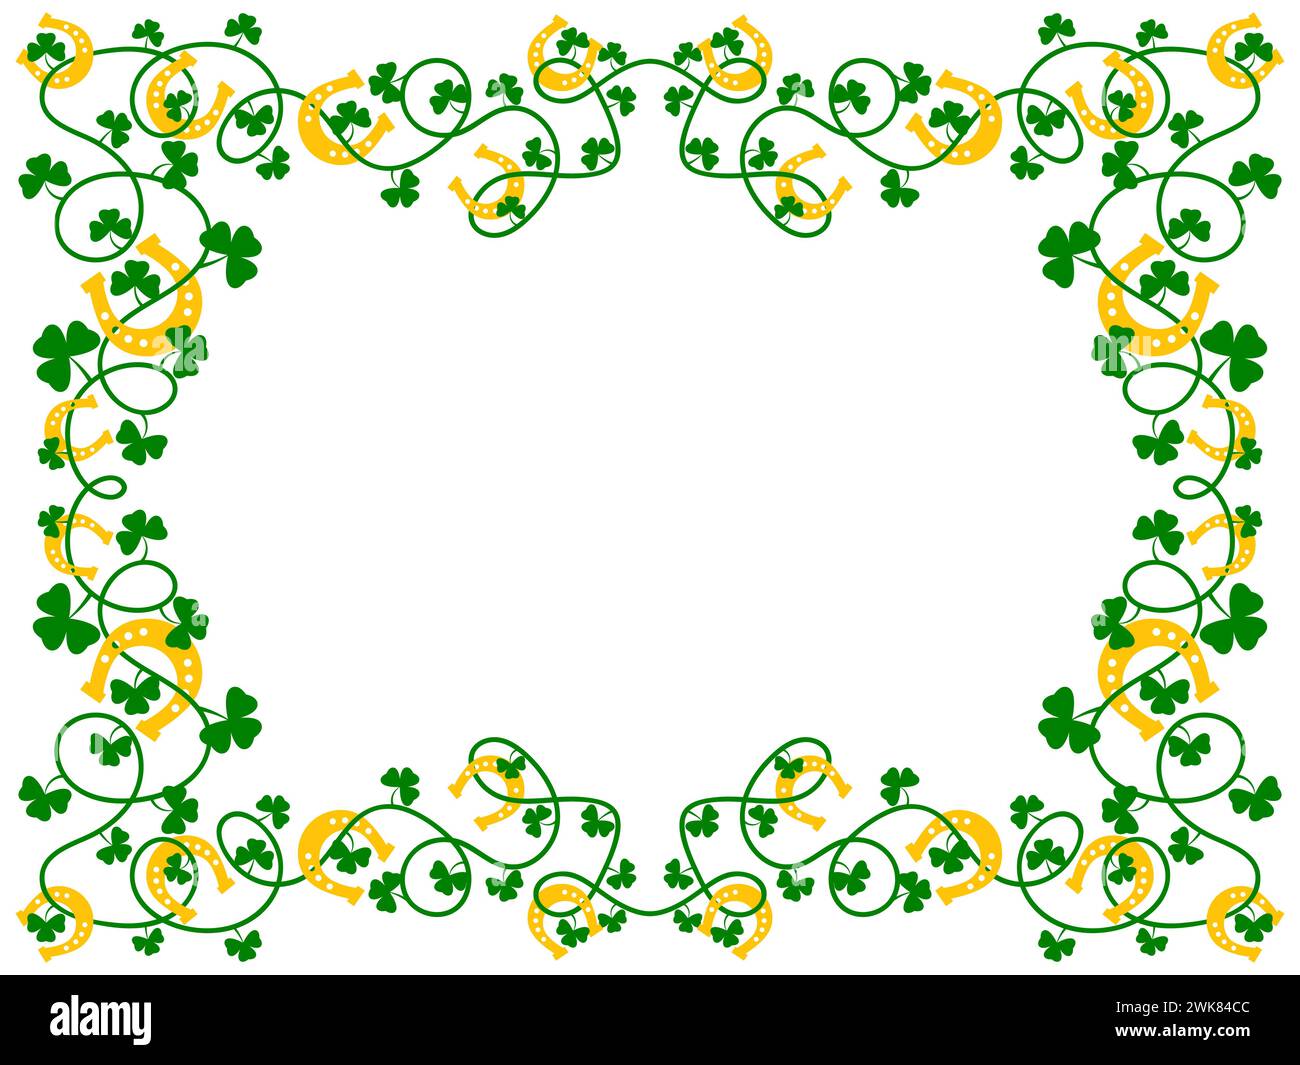 Frame with green clover leaves and horseshoes for St. Patrick's Day. Border with shamrocks and horseshoes on white background. Design for greeting car Stock Vector